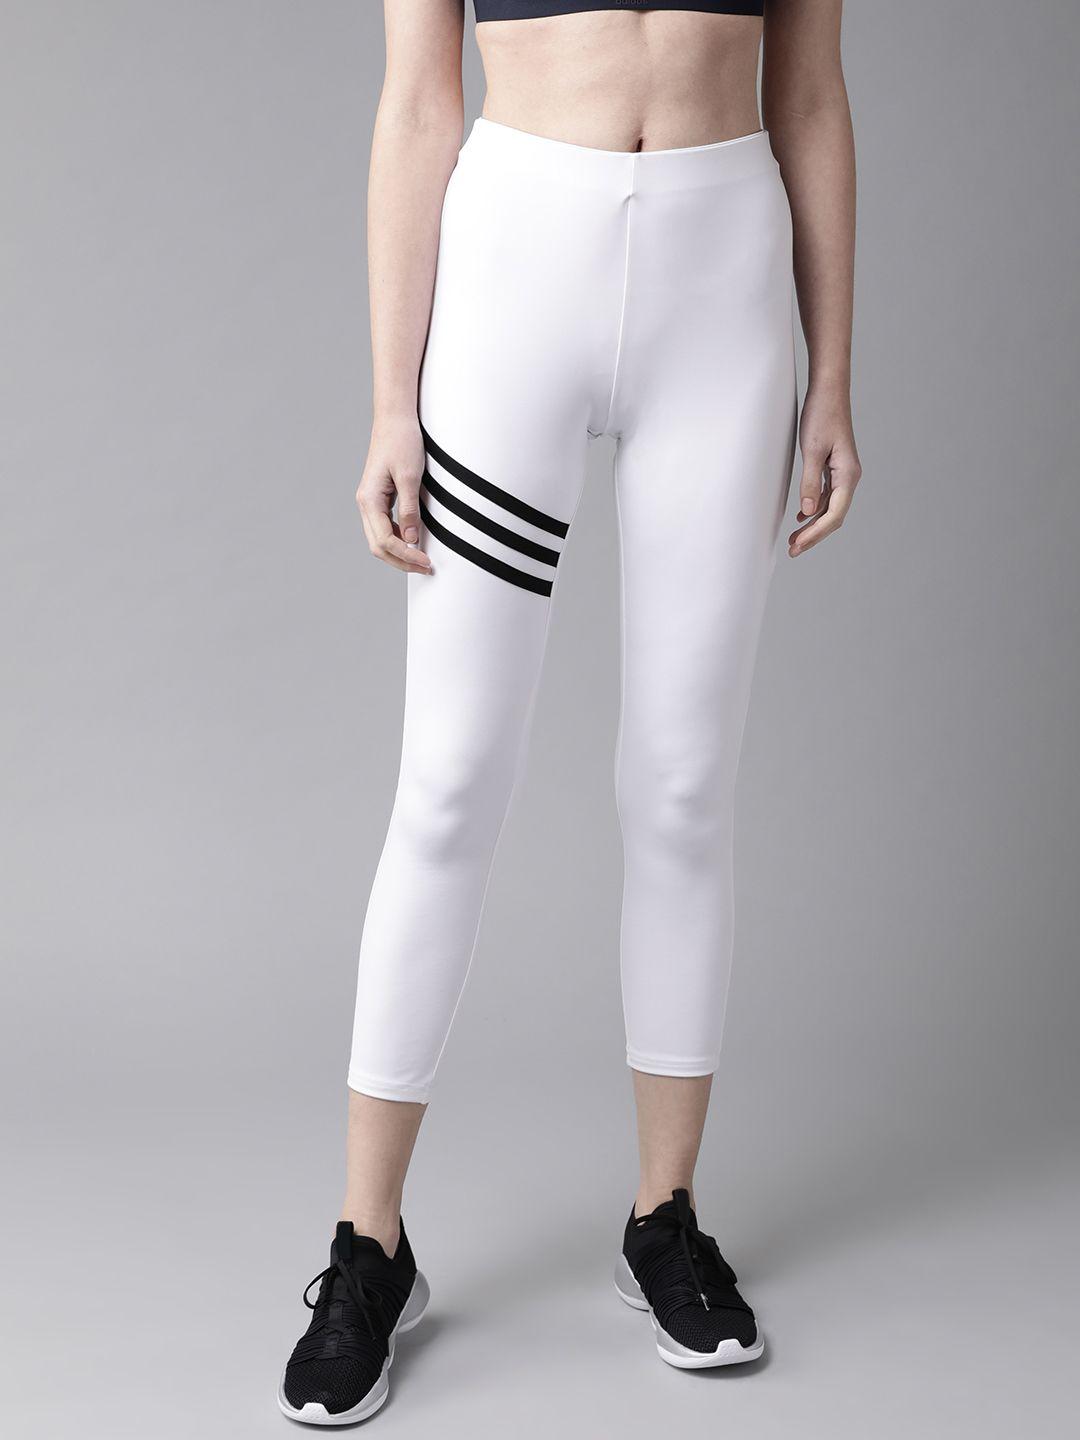 hubberholme-women-white-solid-slim-fit-cropped-tights